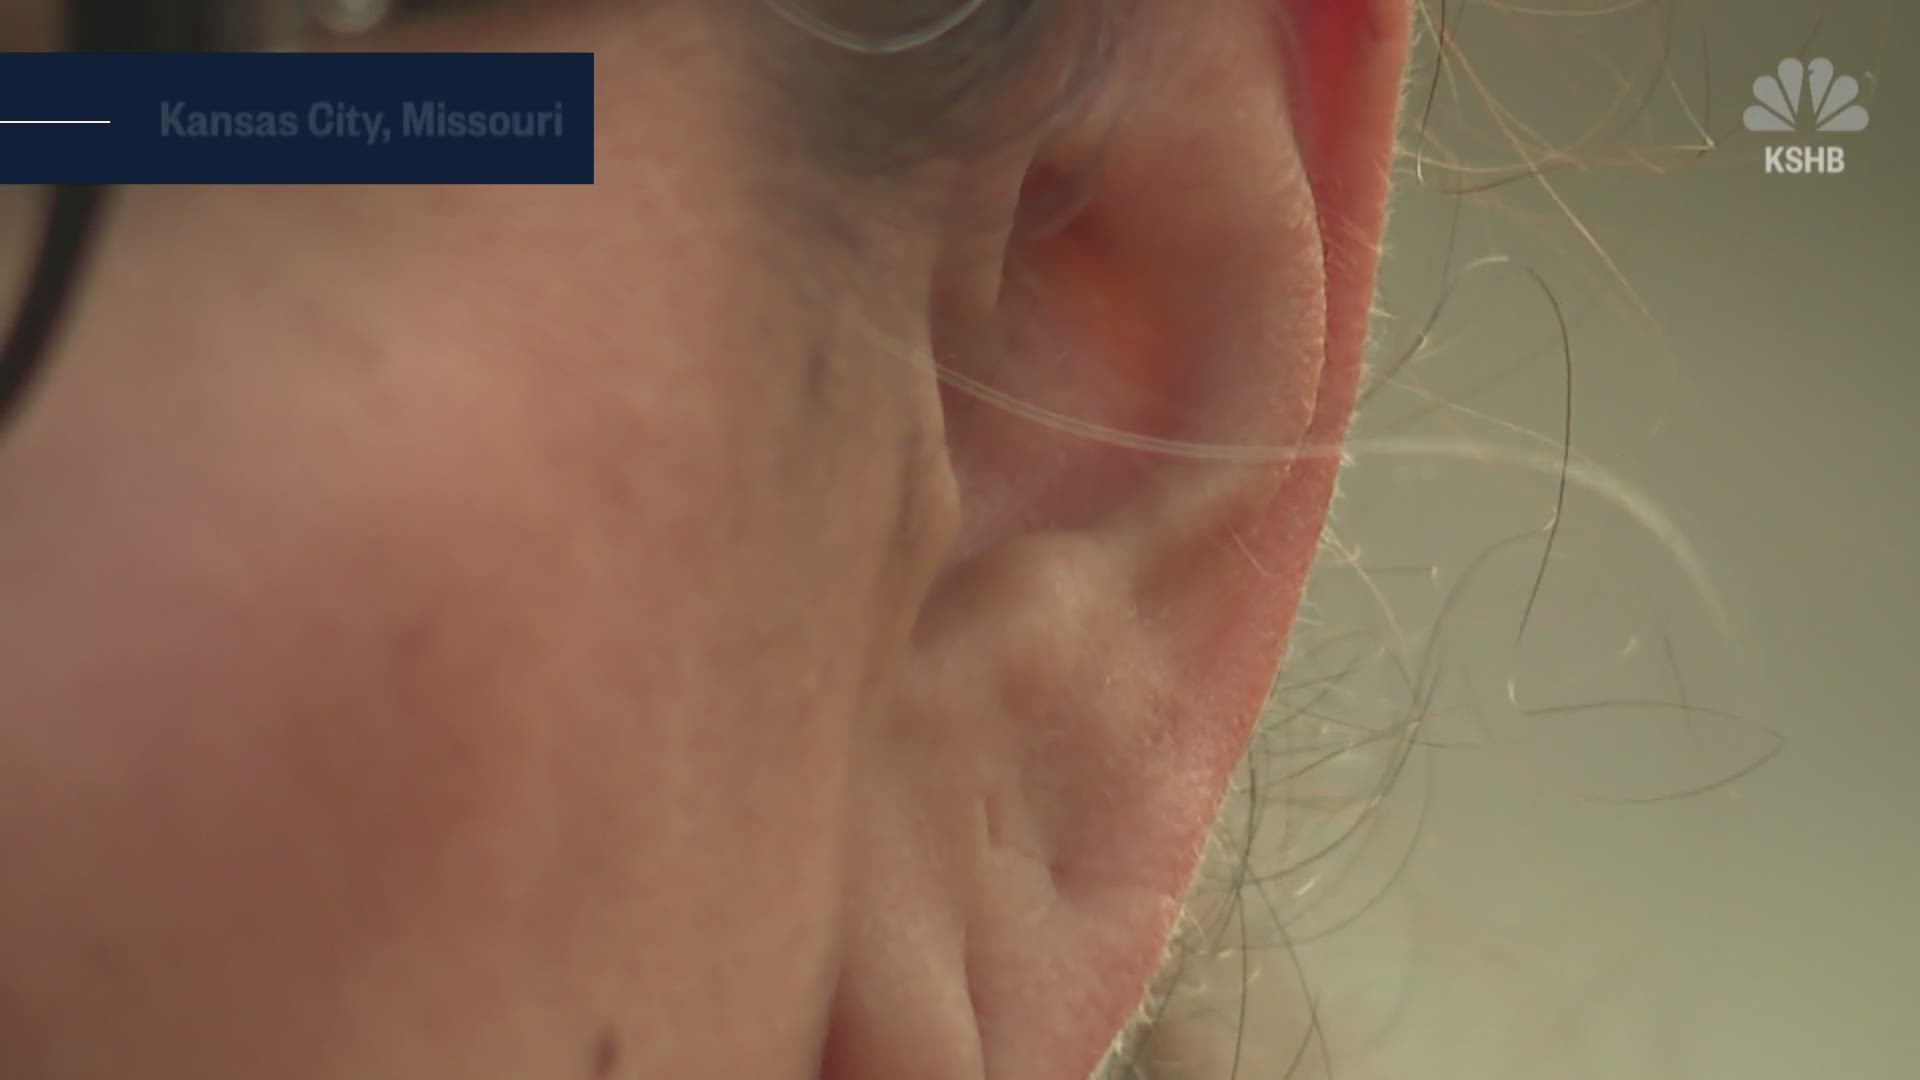 A Kansas City woman is taking extra precautions at bedtime after doctors made a shocking discovery when she complained of pain in her ear.